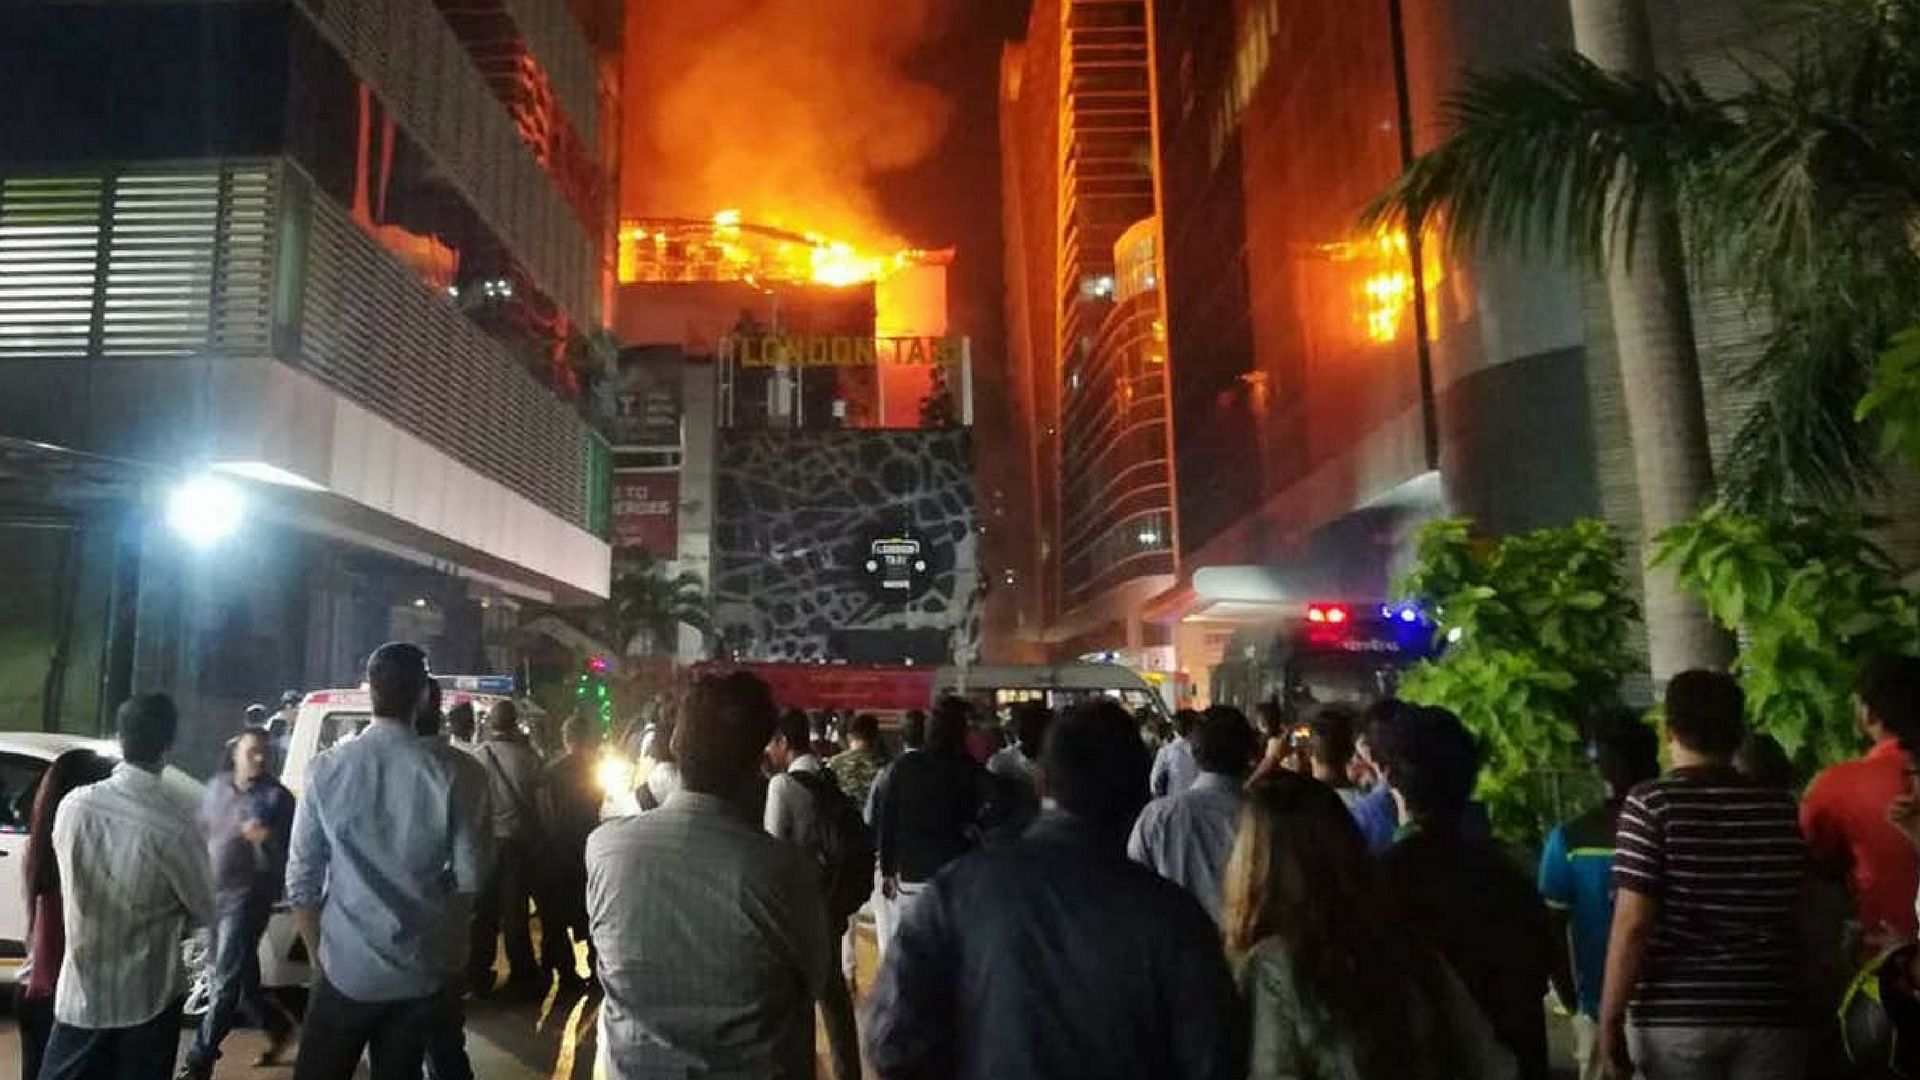  The Kamala Mills fire, which left 14 dead and many more injured.